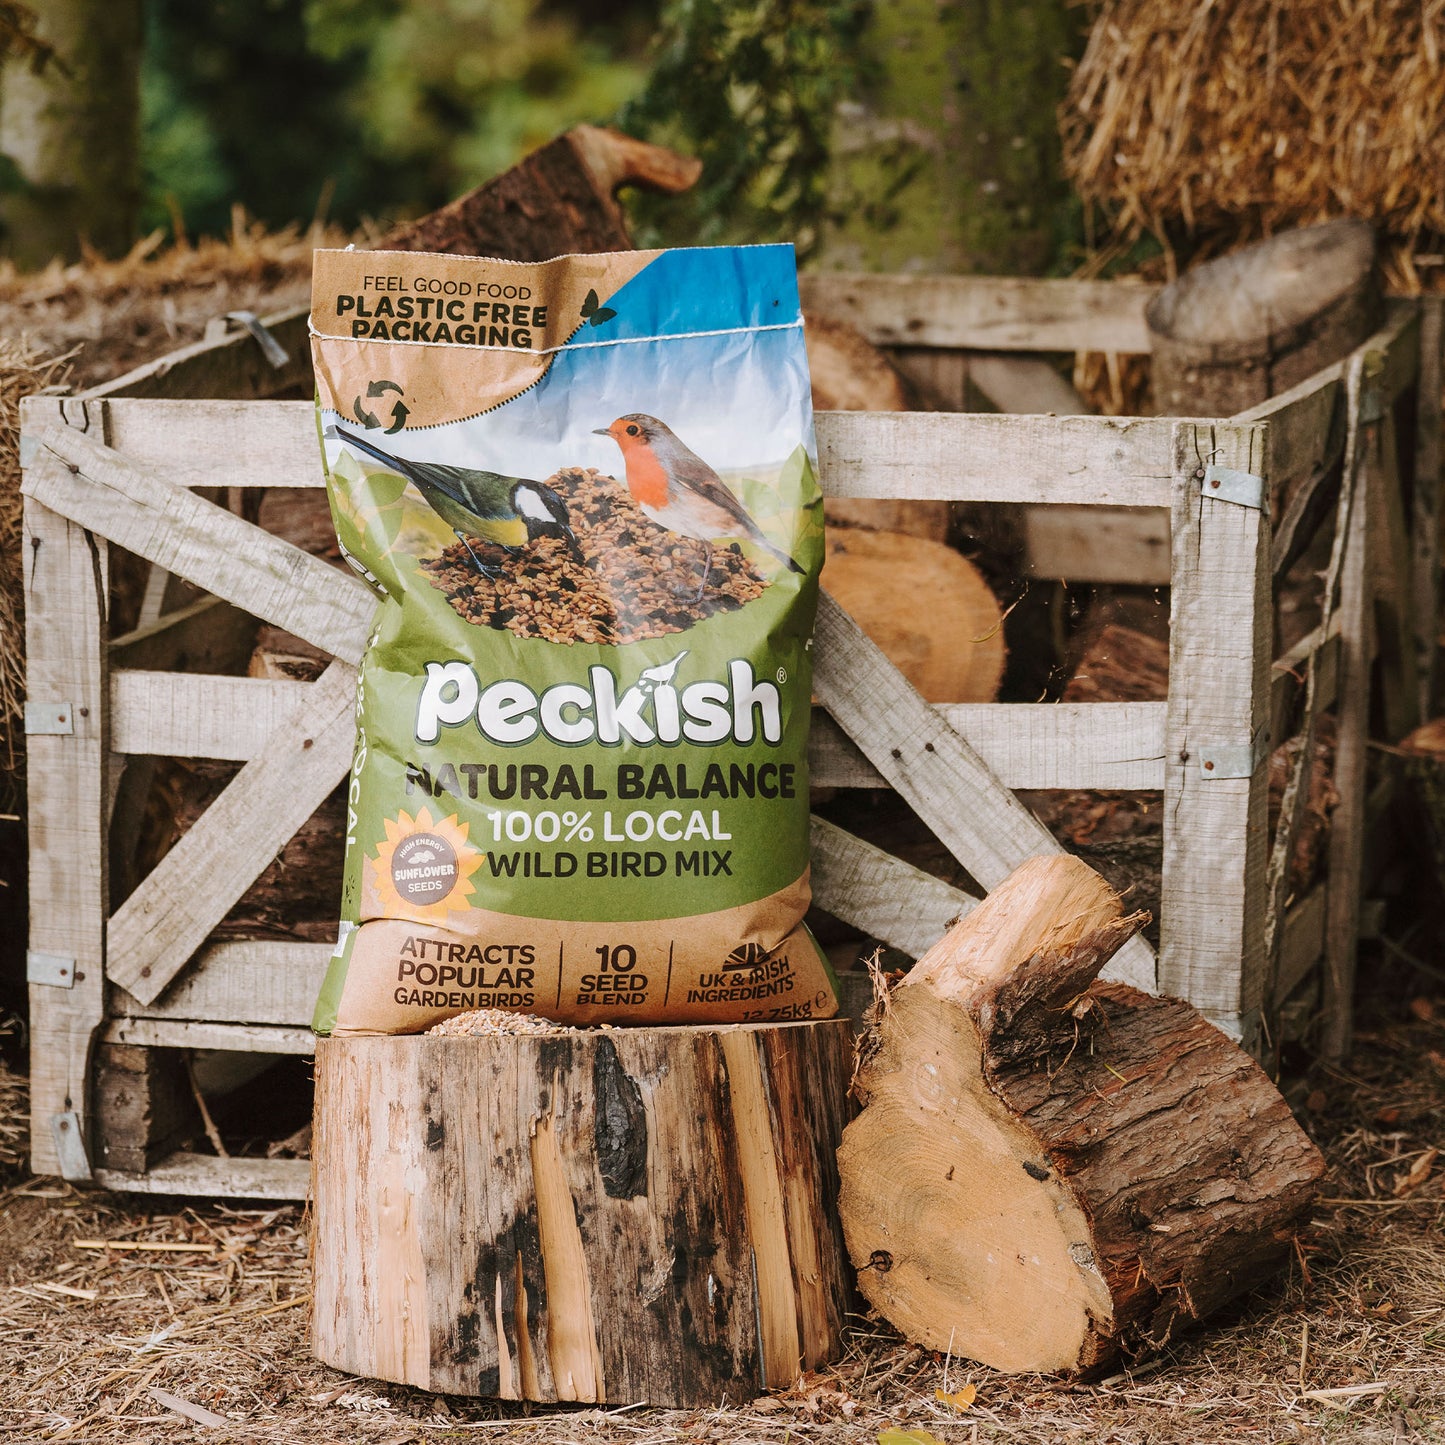 Peckish Natural Balance Seed Mix in packaging 12.75kg